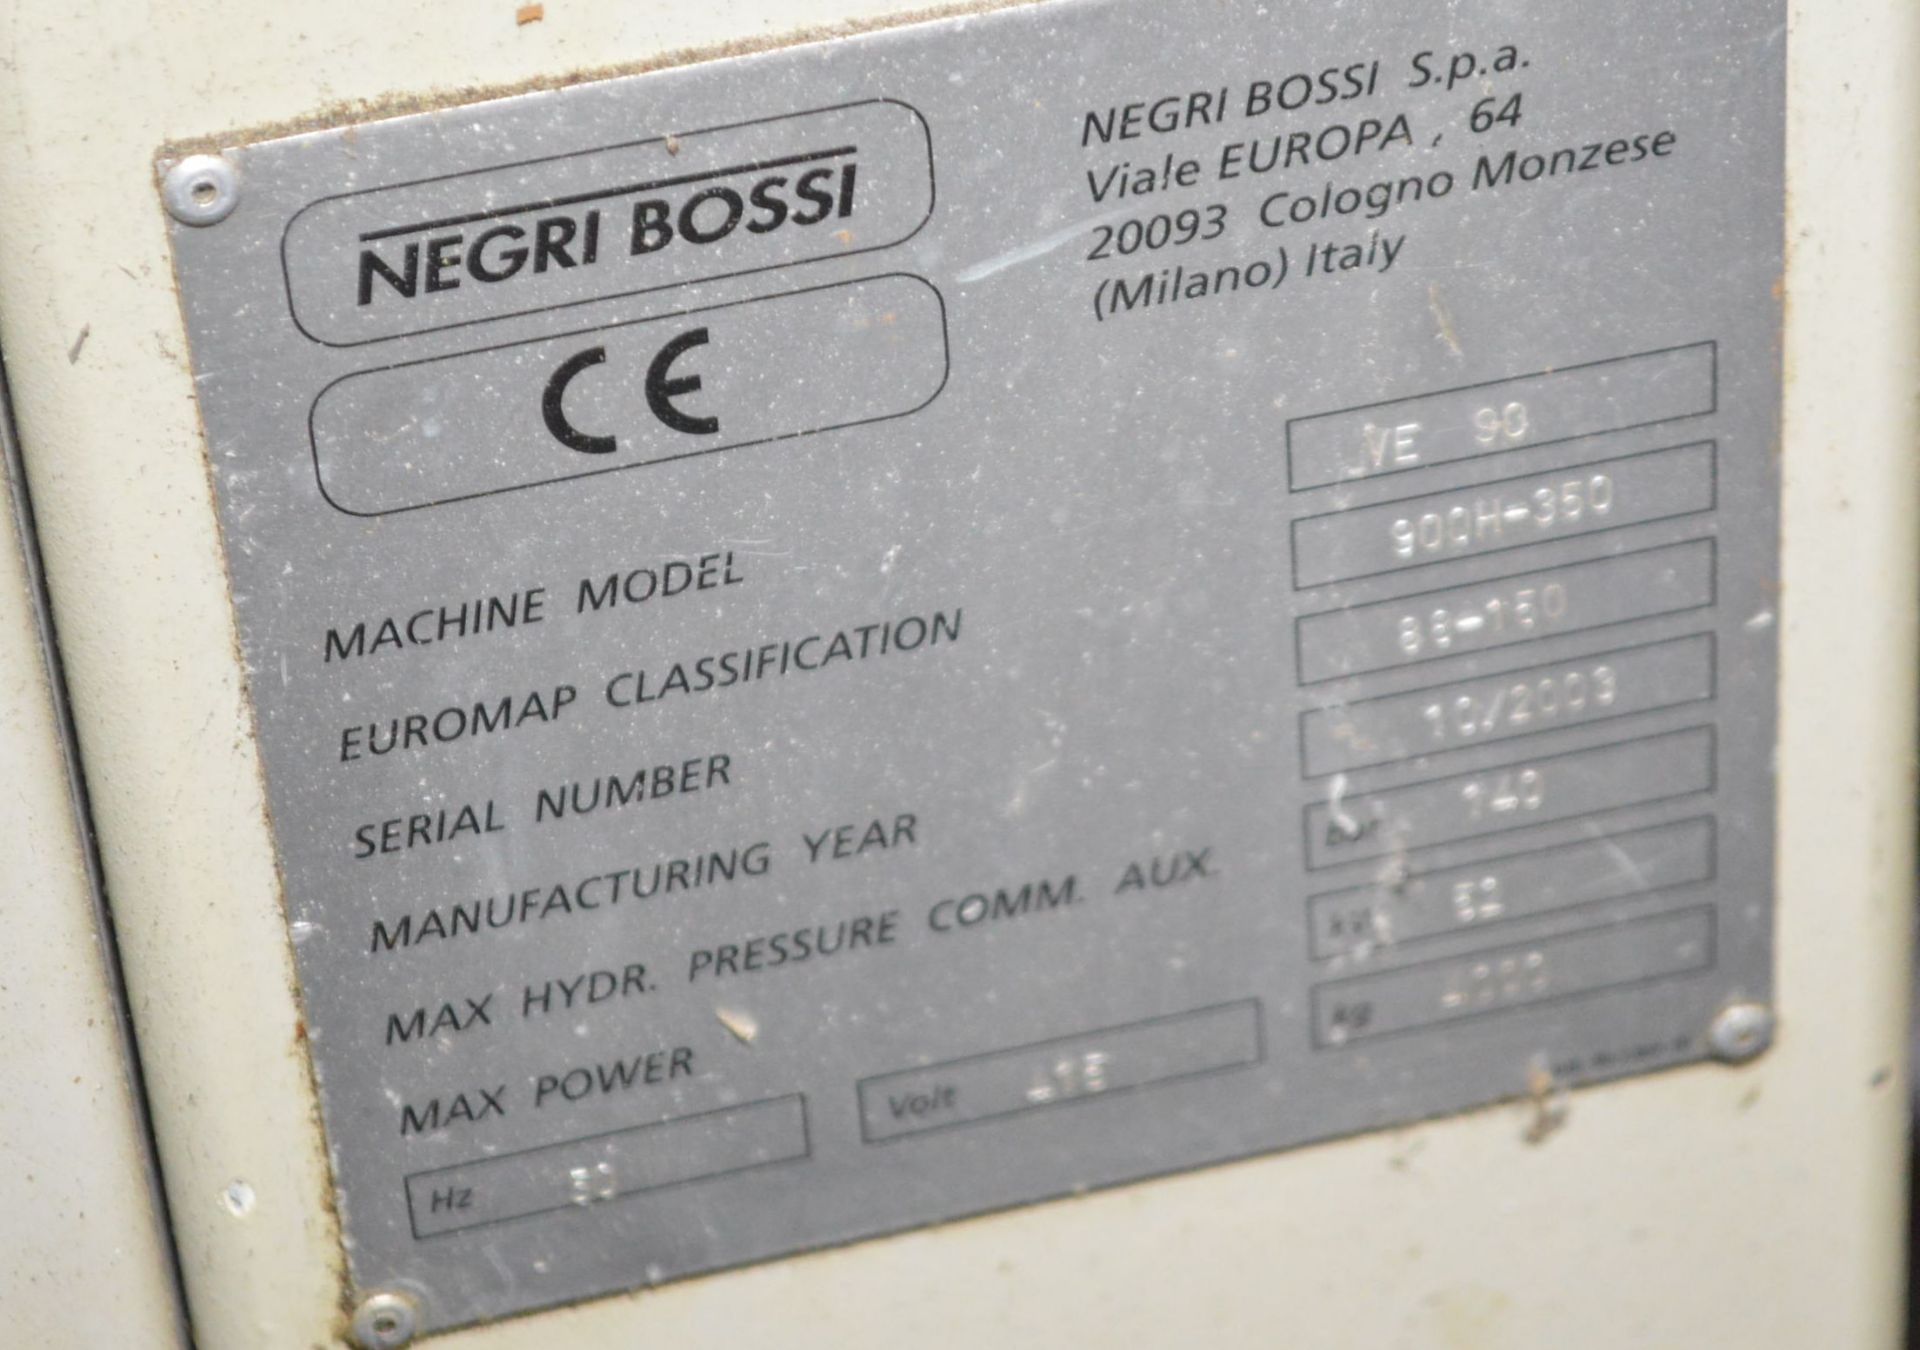 Negri Bossi VE90-350 90 tonne PLASTIC INJECTION MOULDING MACHINE, serial no. 88-150, euromap - Image 4 of 4